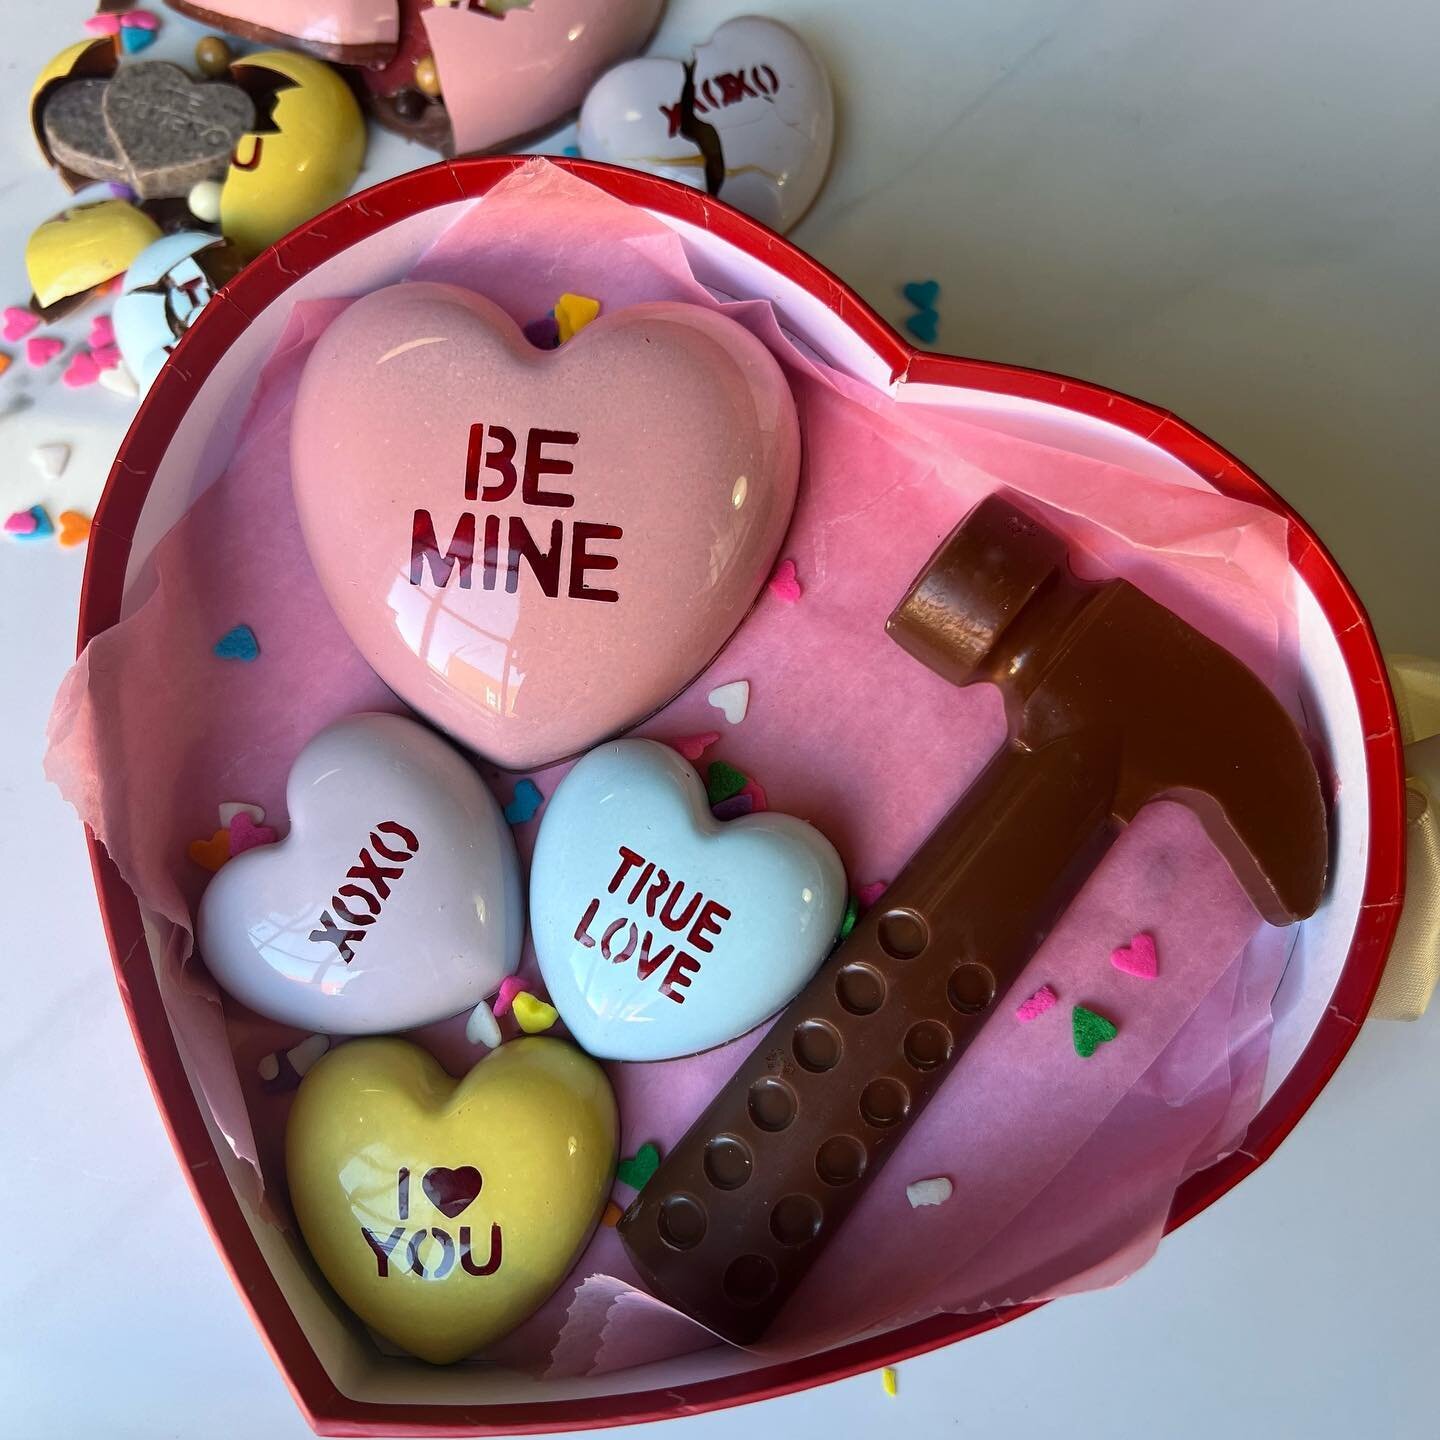 NEW DROP! Sweetheart Valentine&rsquo;s Day Collection💕 
This Valentine's Day, surprise your loved one with a delicious chocolate box filled with goodies! Not only are they delicious, but they're also fun to smash open! 
Filled with hearts that say I